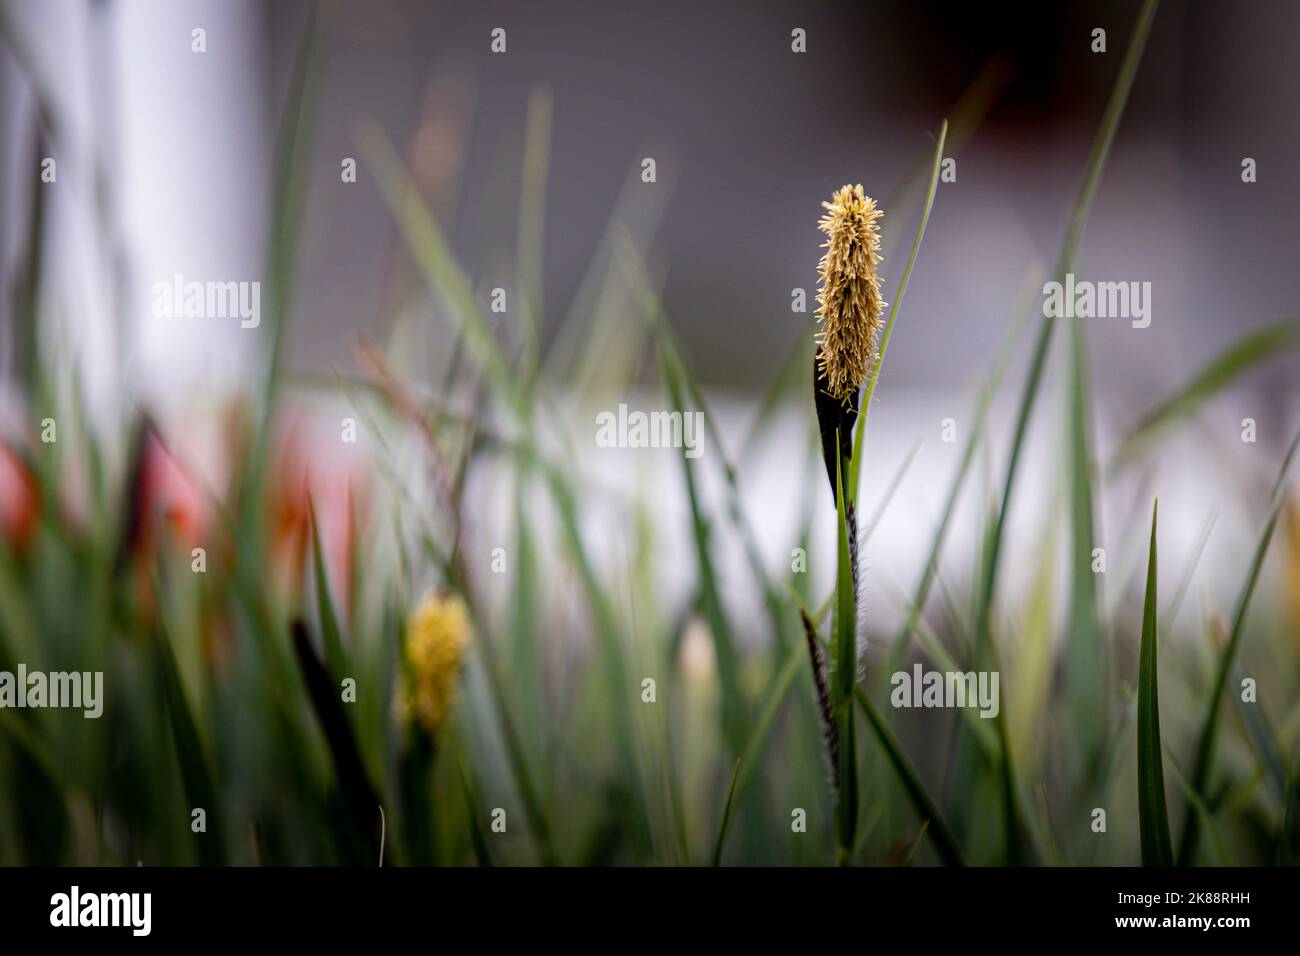 A selective focus of a Carex Pilosa flower growing in a field found in the wilderness Stock Photo